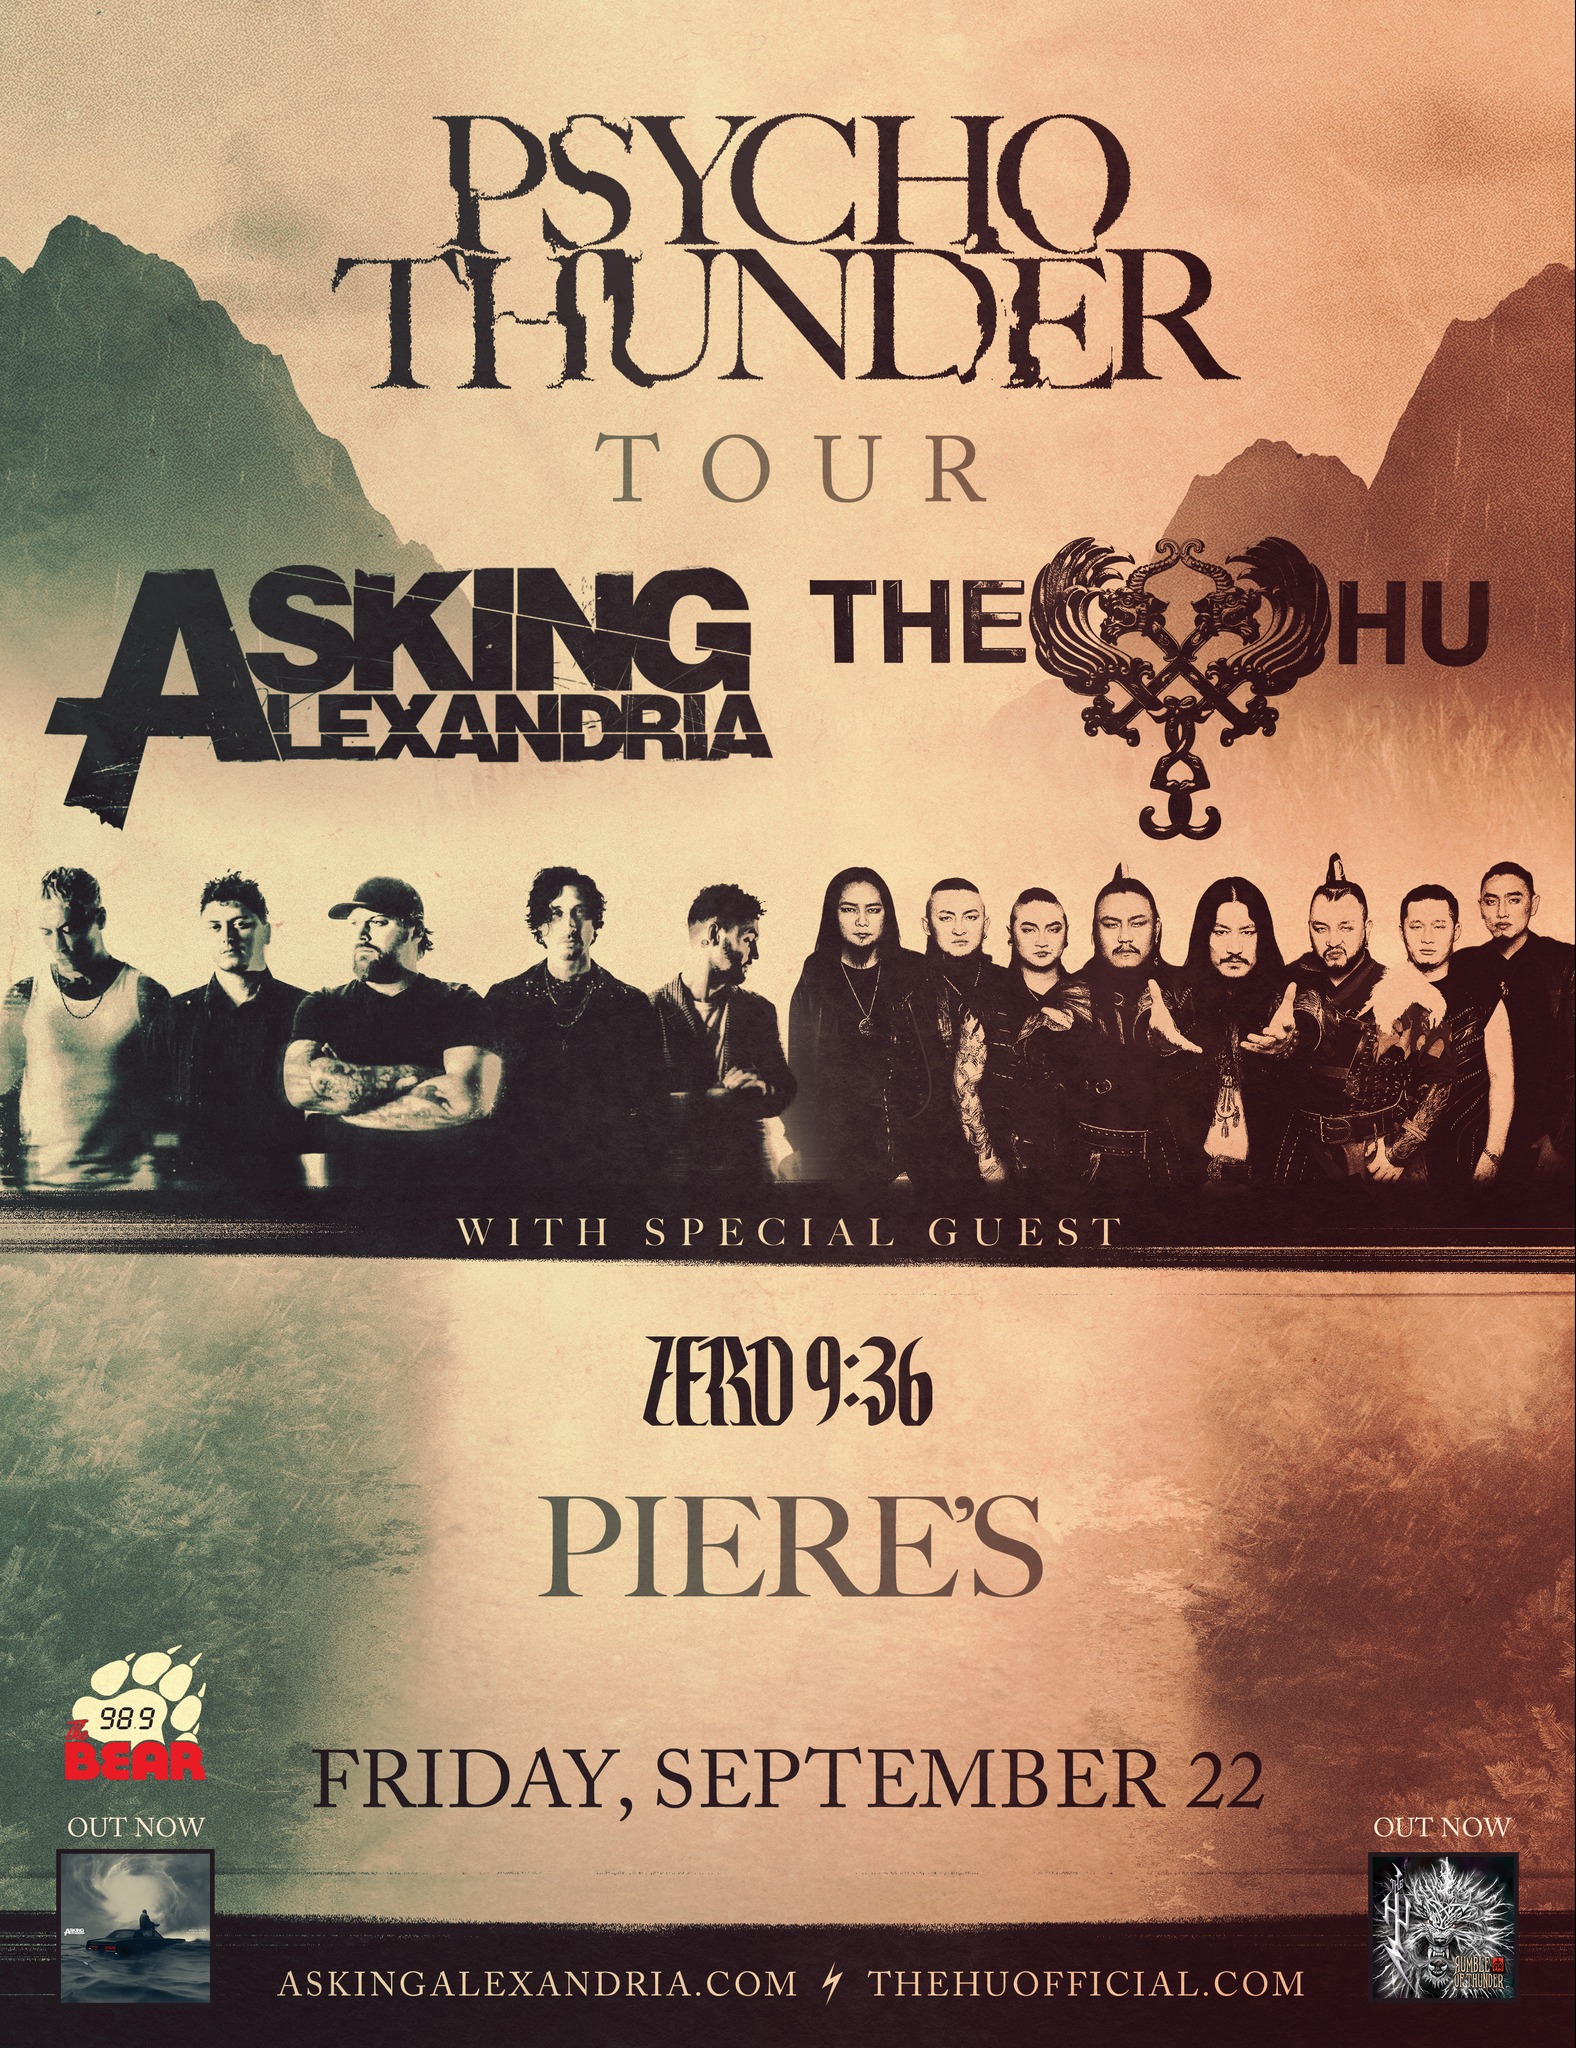 The Hu, Asking Alexandria and Zero 9:36 bring the Psycho Thunder tour to Piere’s